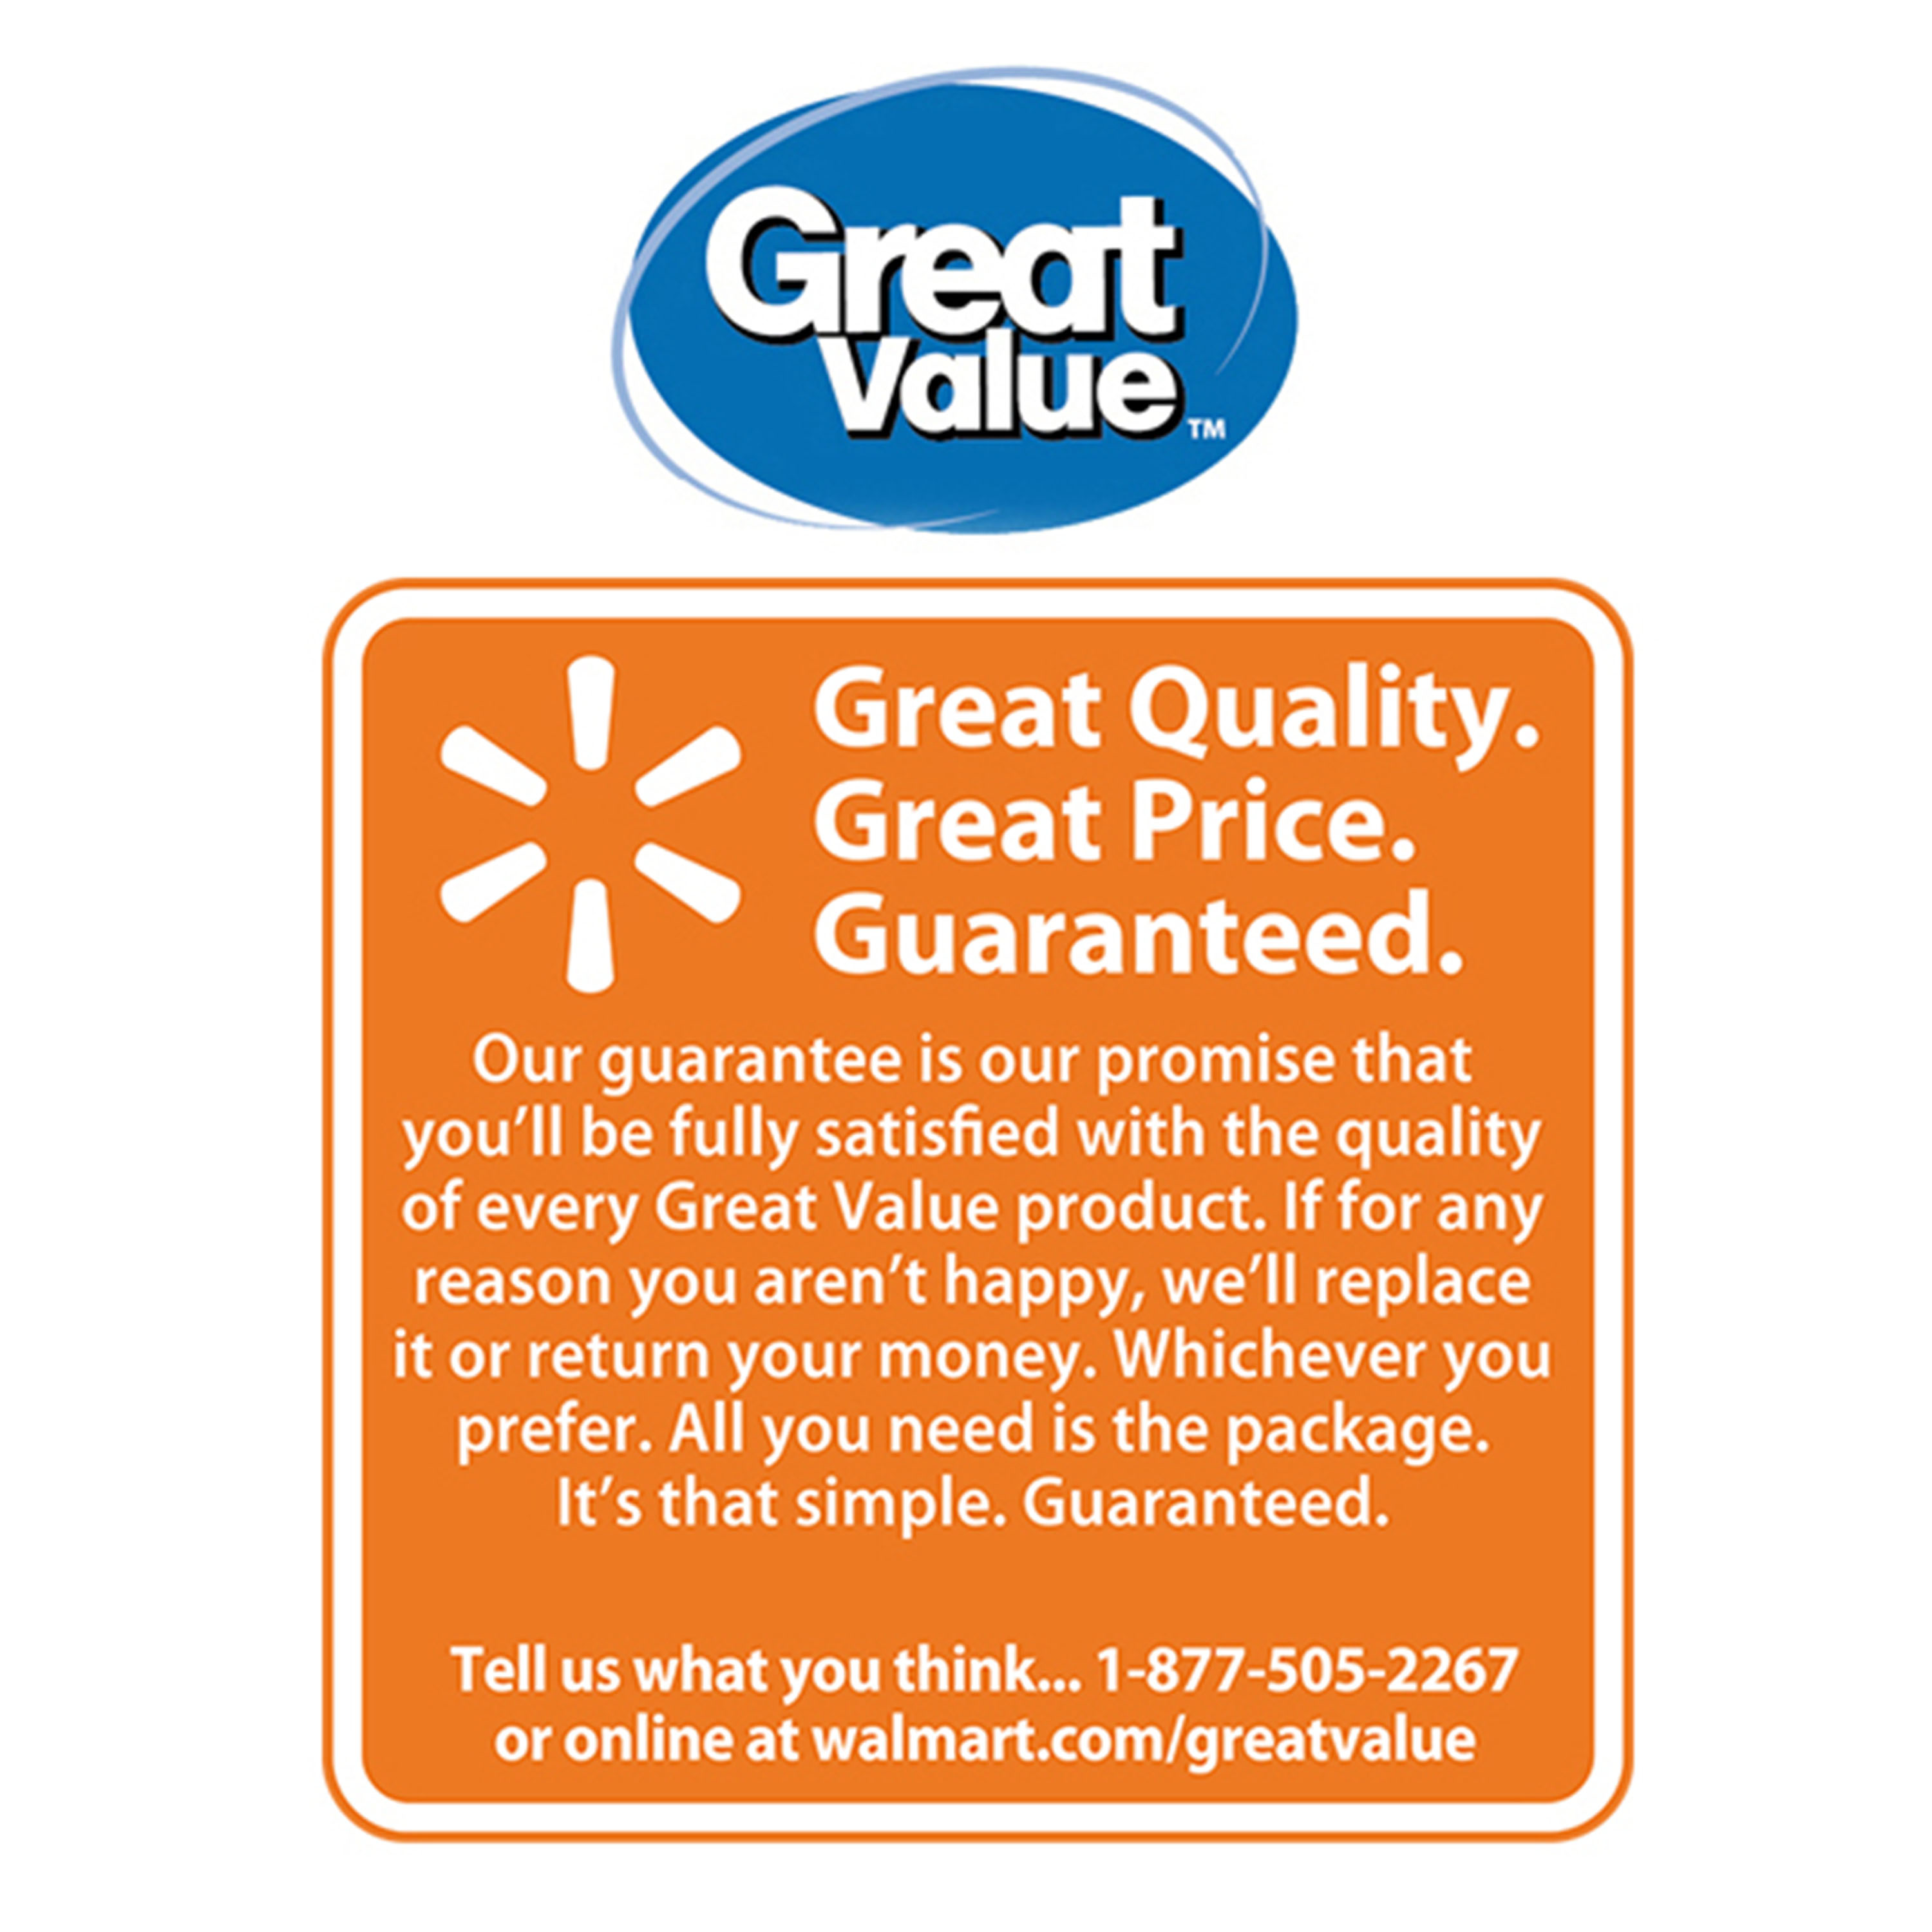 Great Value Fresh Seal Slider Zipper Gallon Storage Bags, 30 Count - image 5 of 8